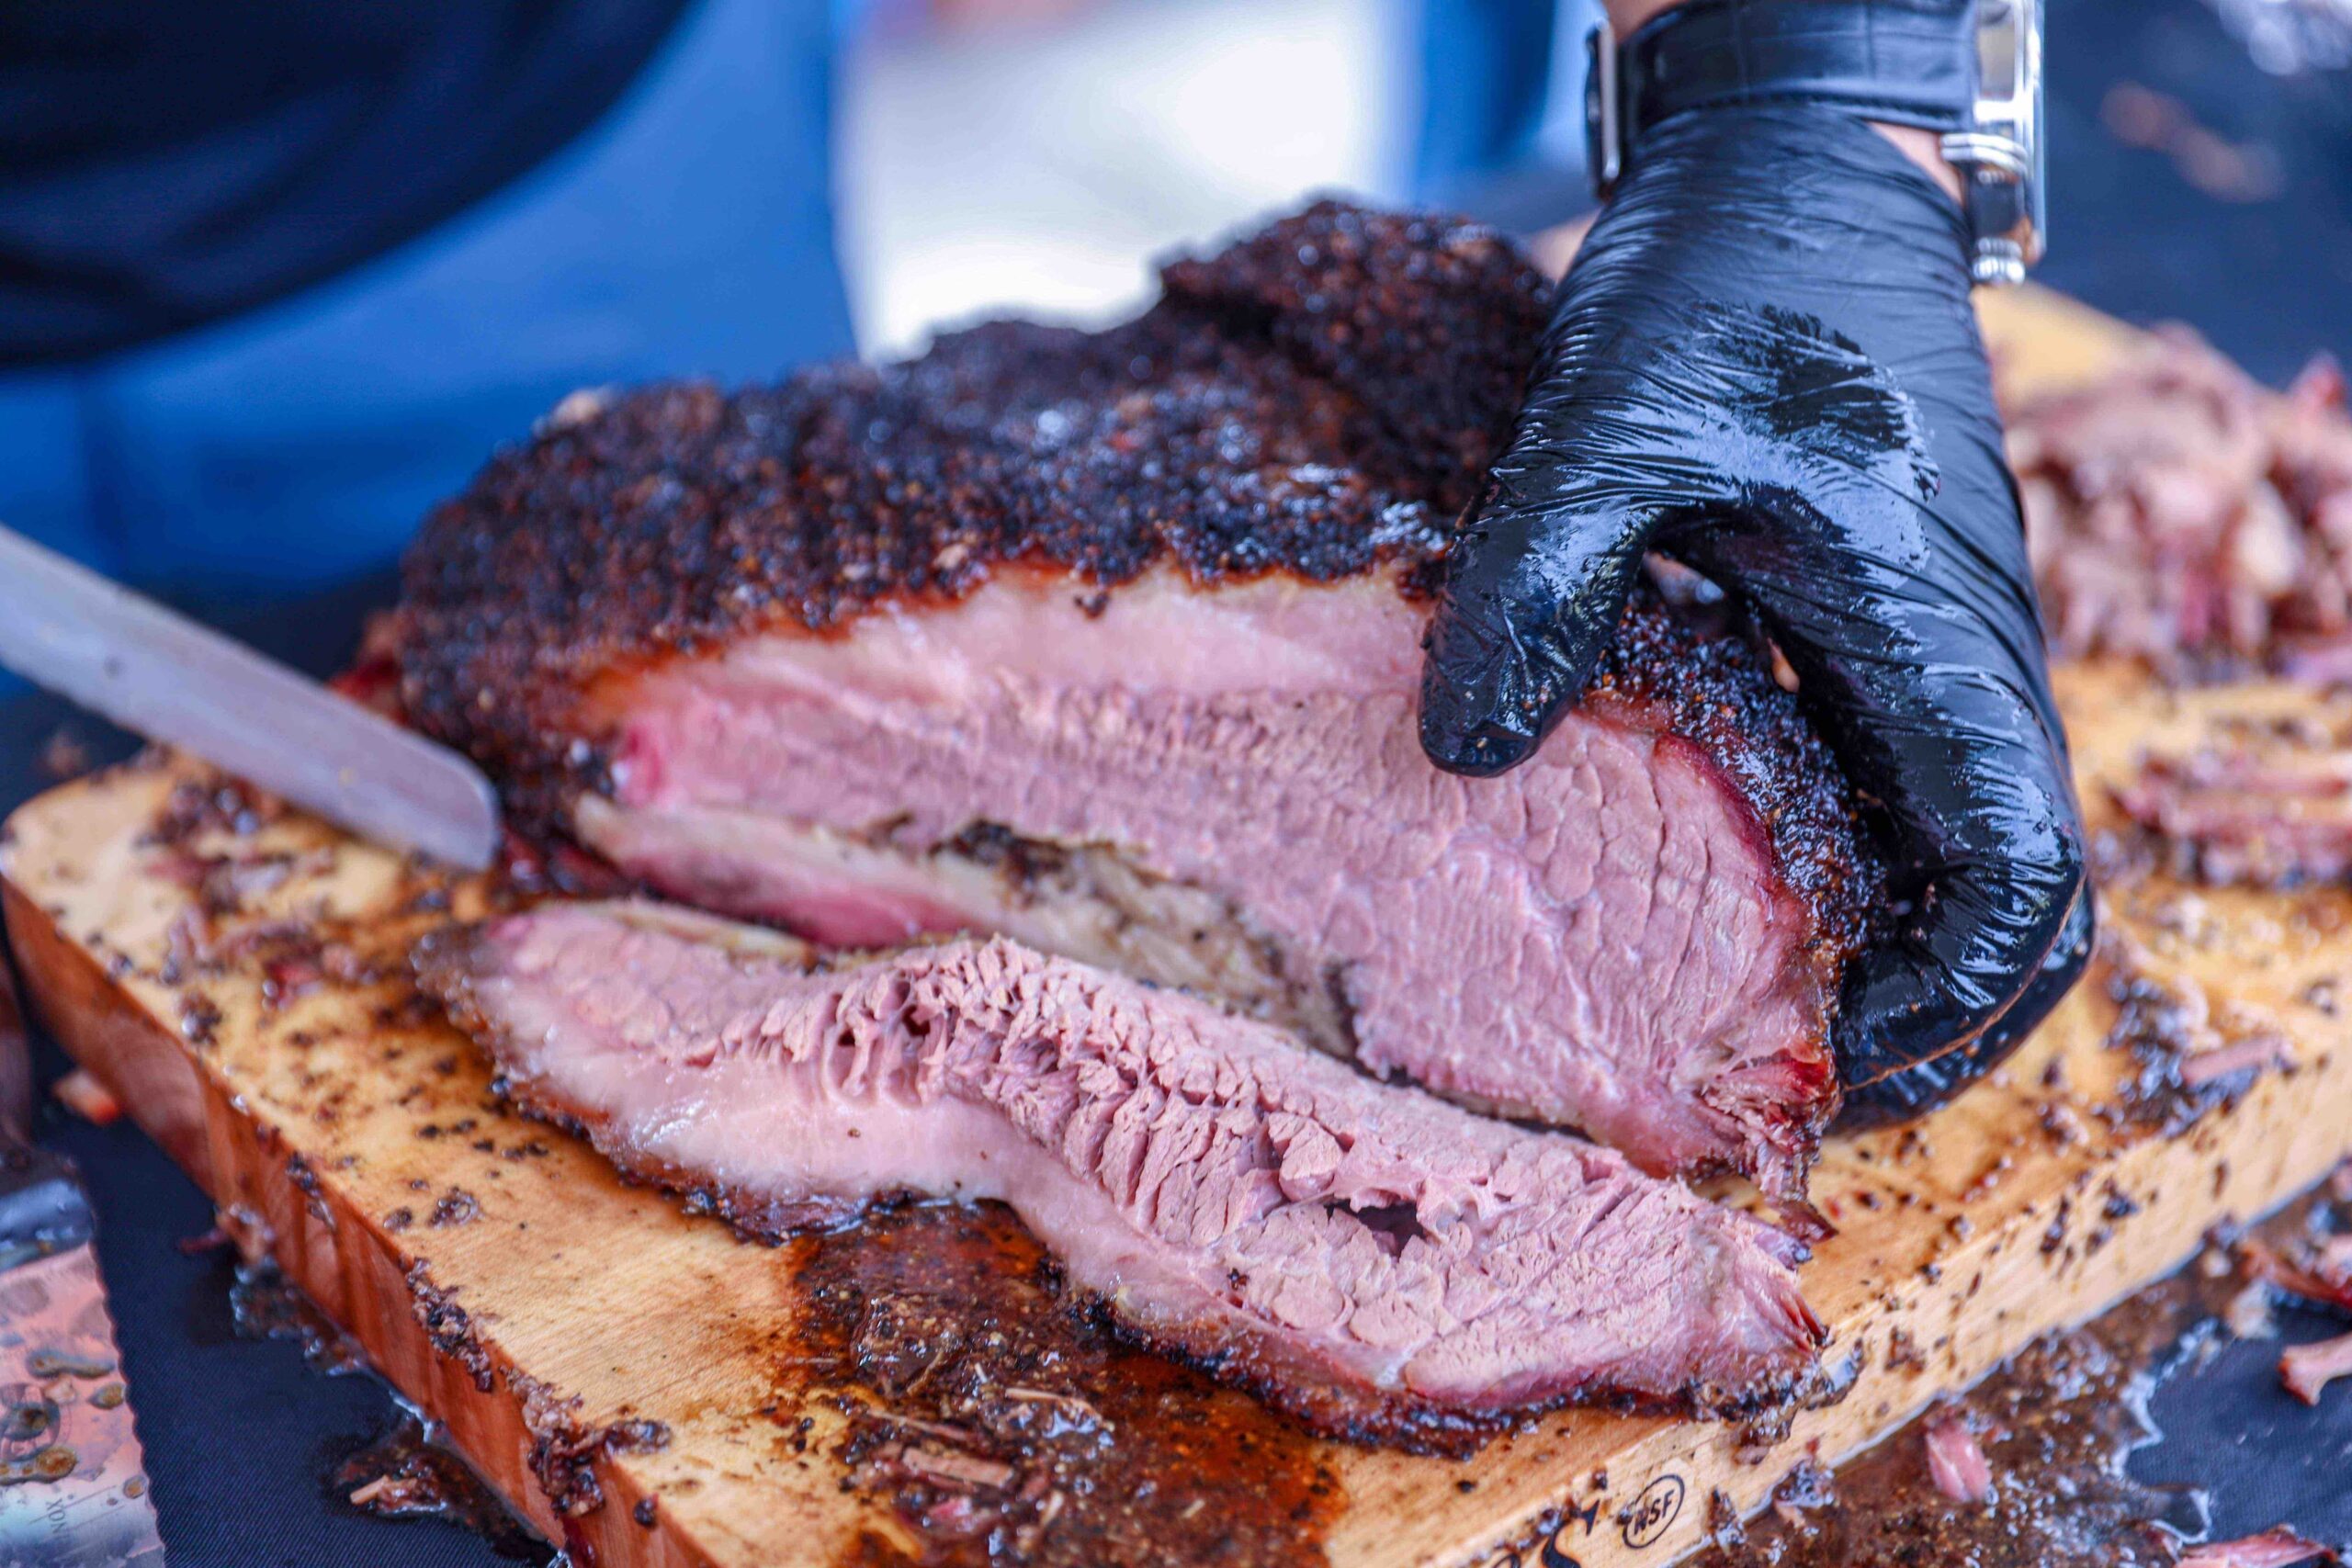 Brisket Prices on the Rise